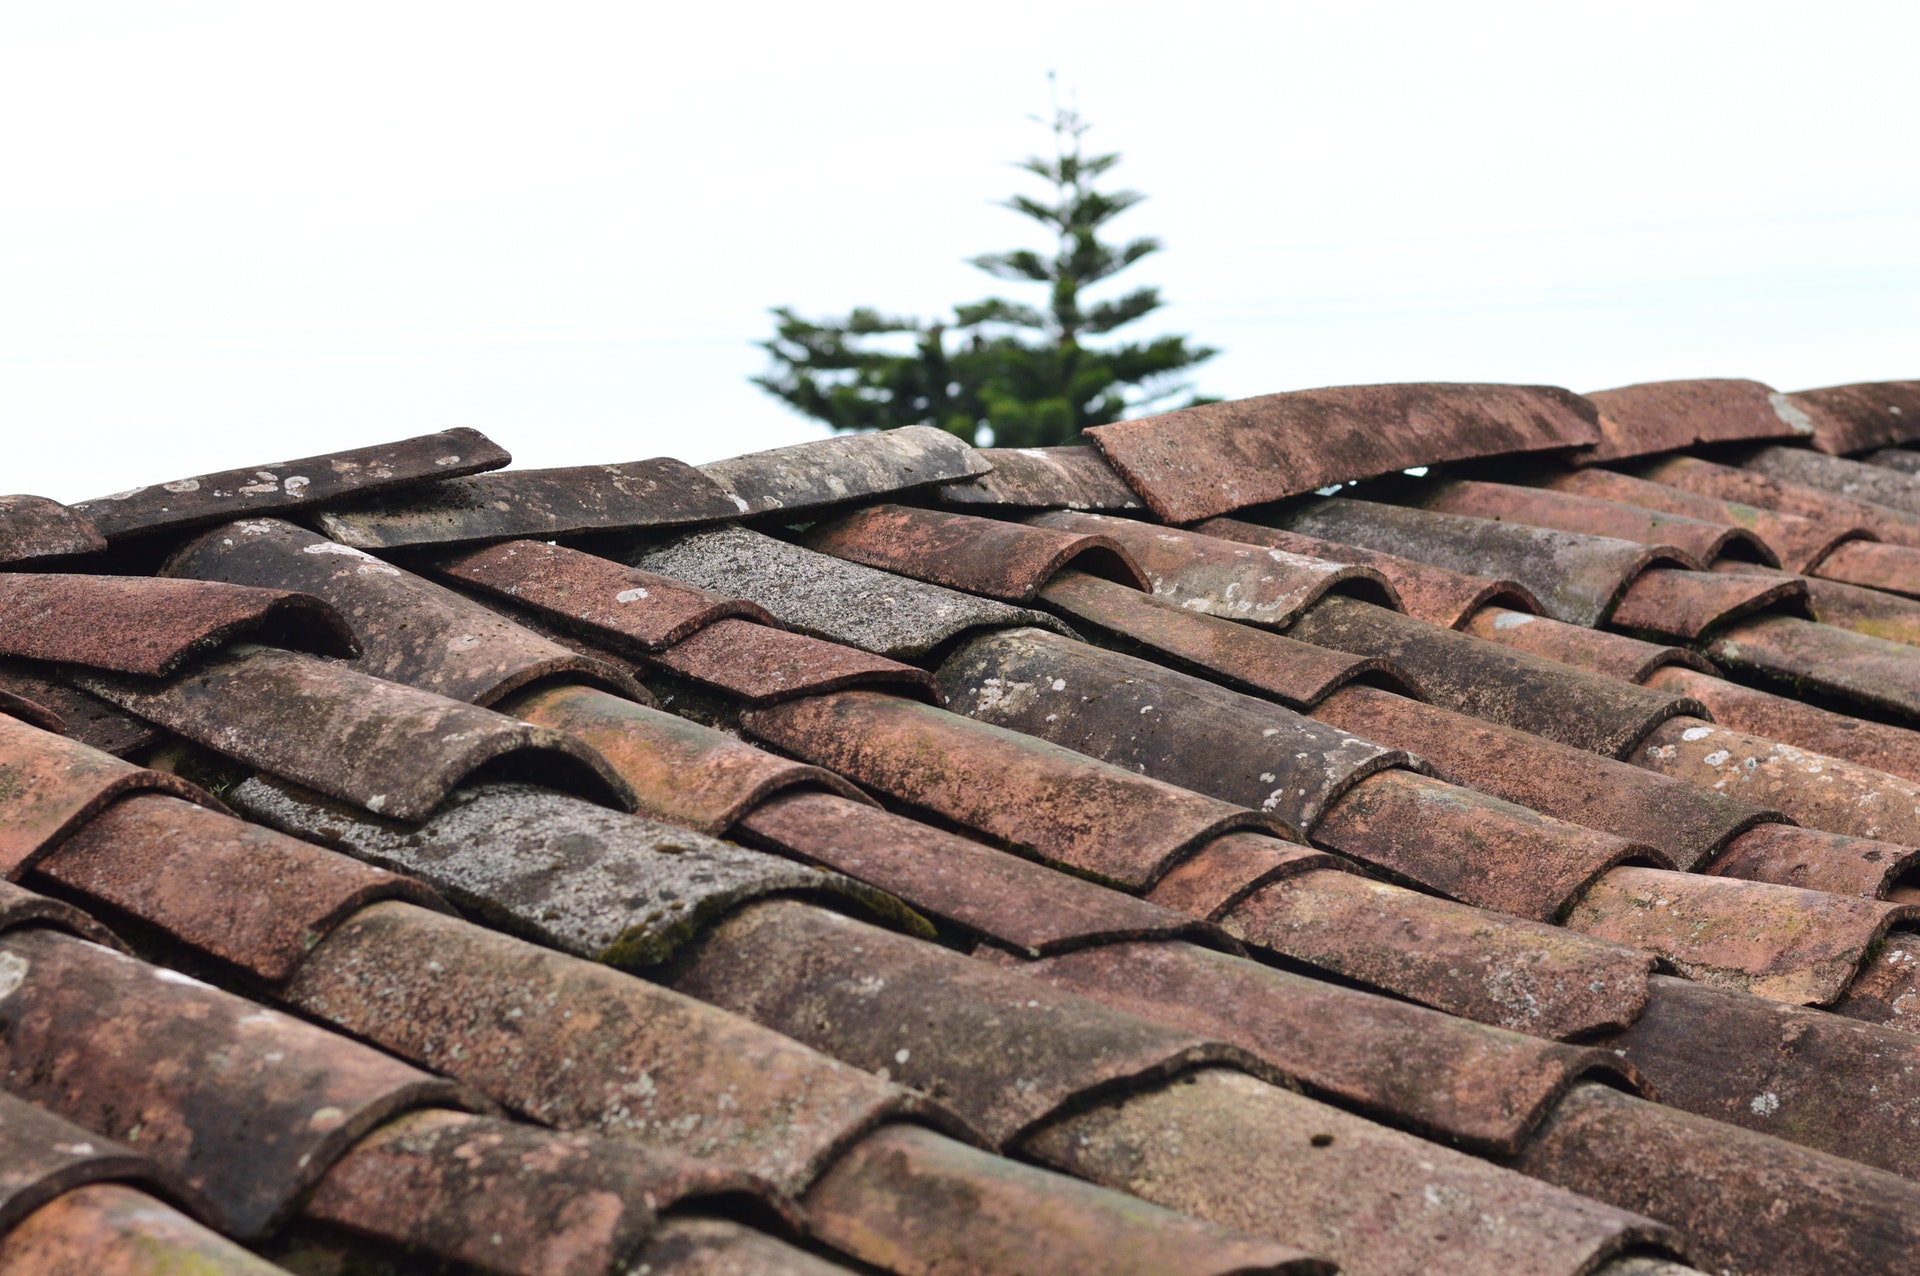 old ceramic shingles in need of replacement due to mold growth